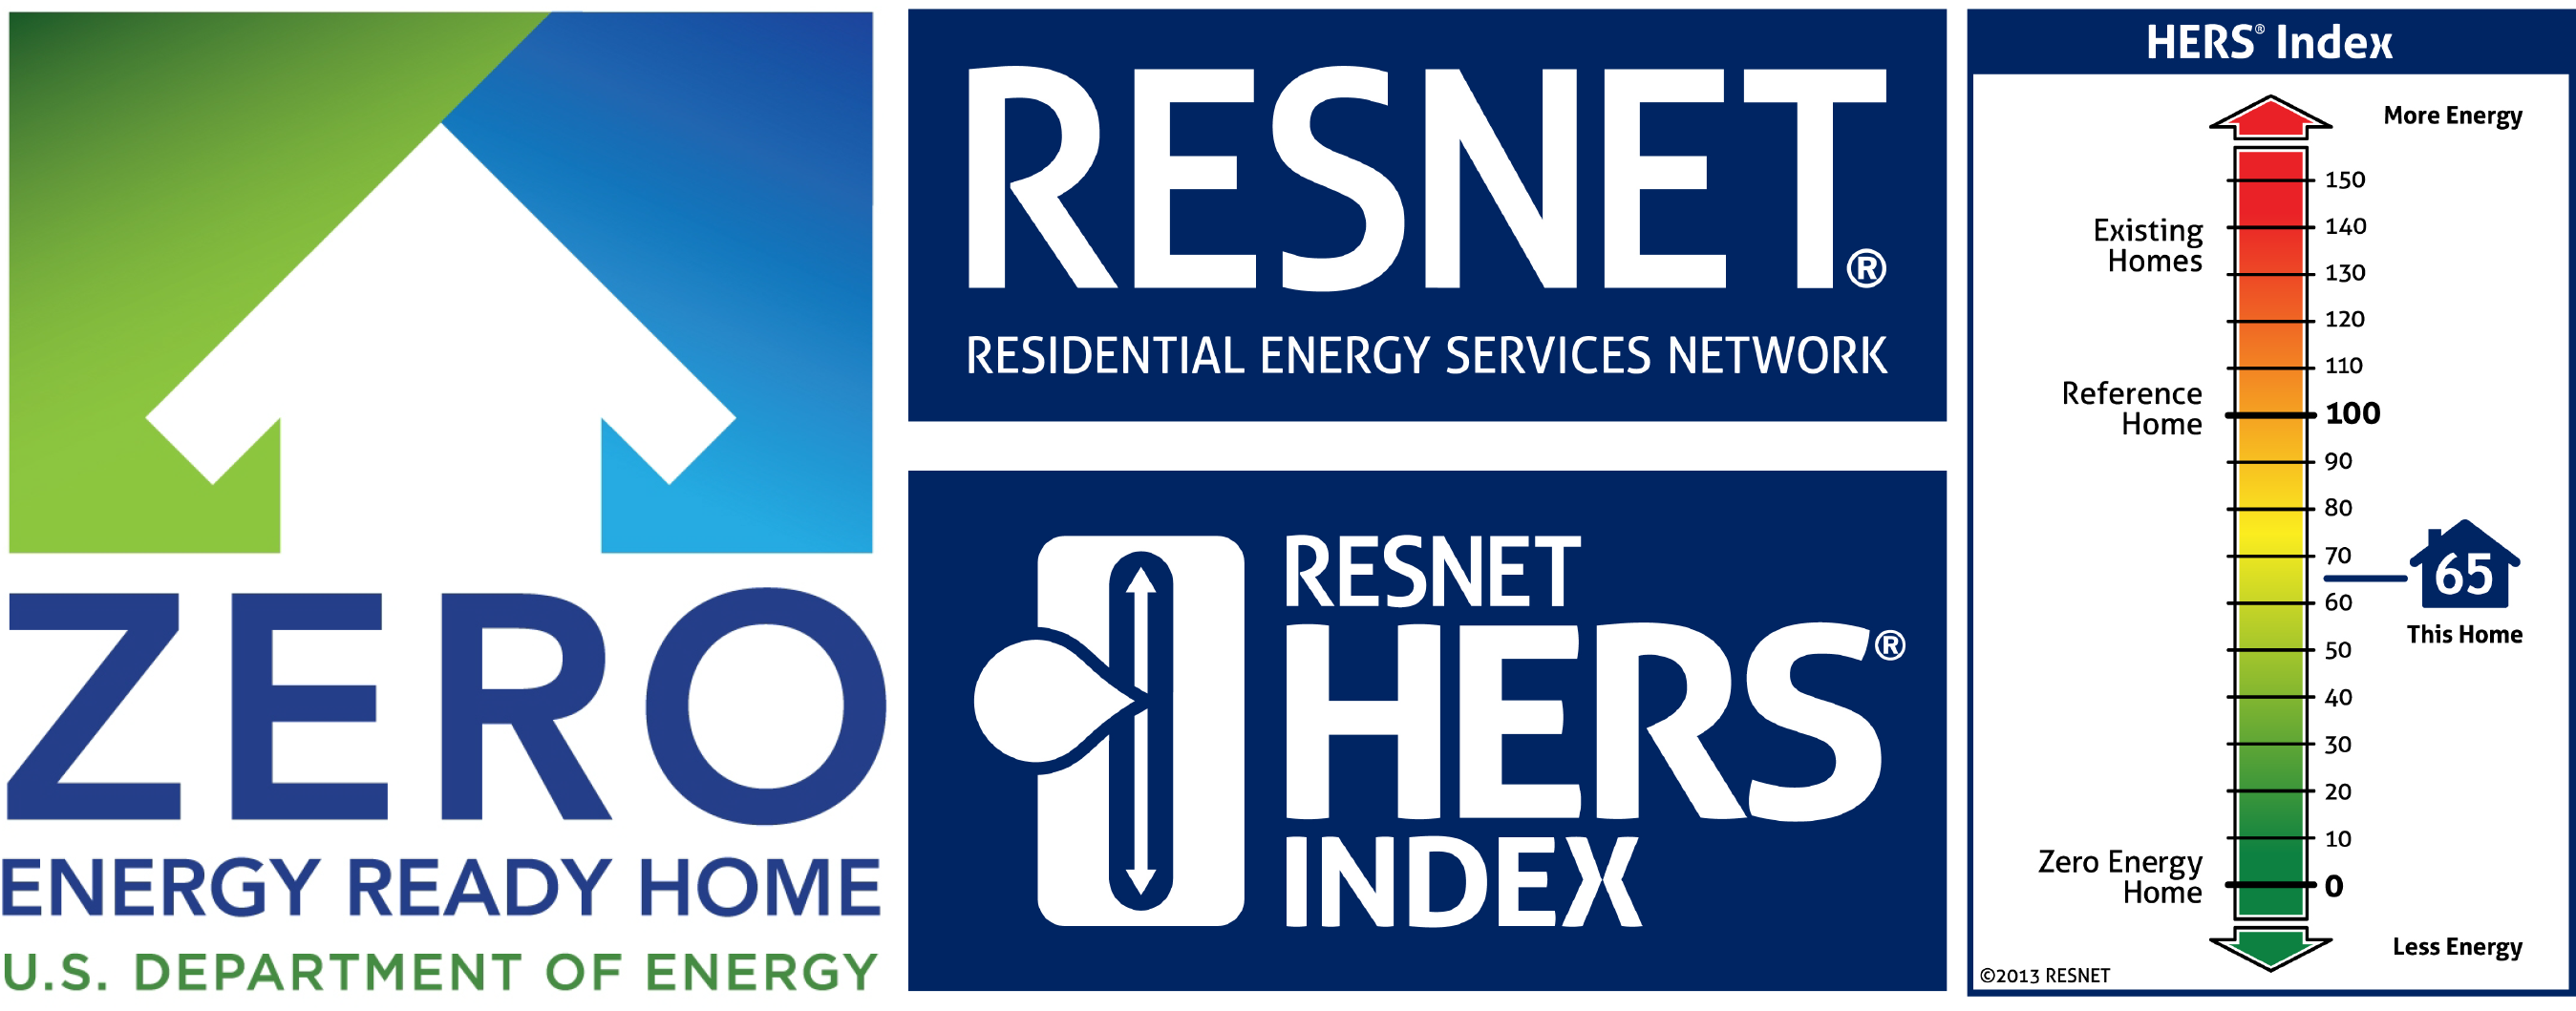 DOE, RESNET and HERS certified